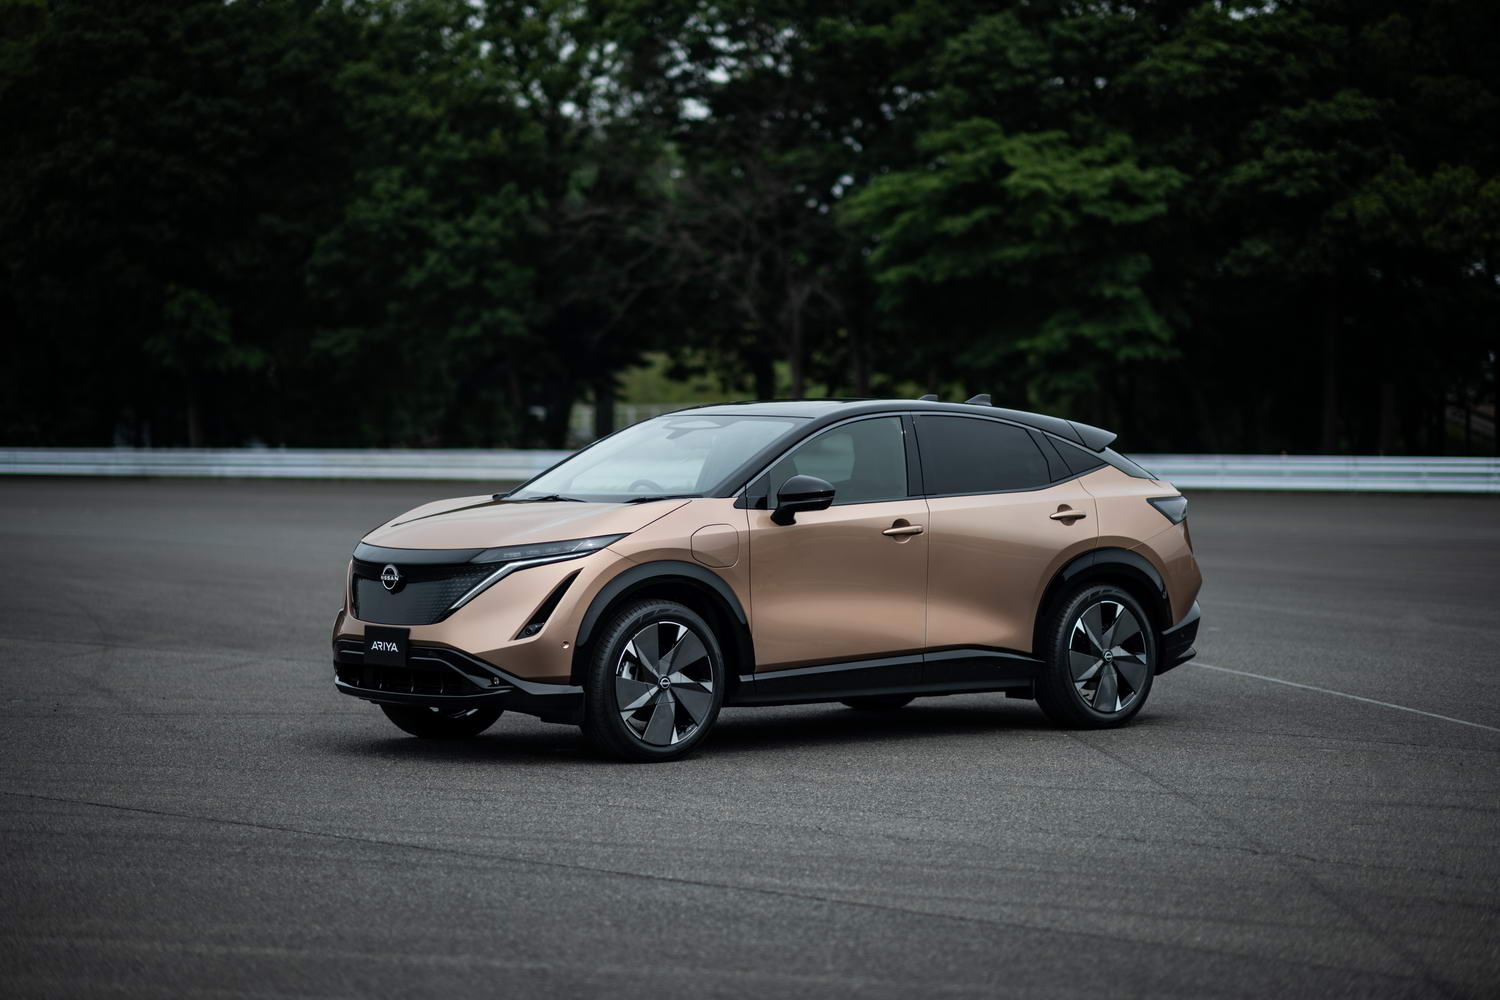 Nissan Ariya is new electric coupe-crossover